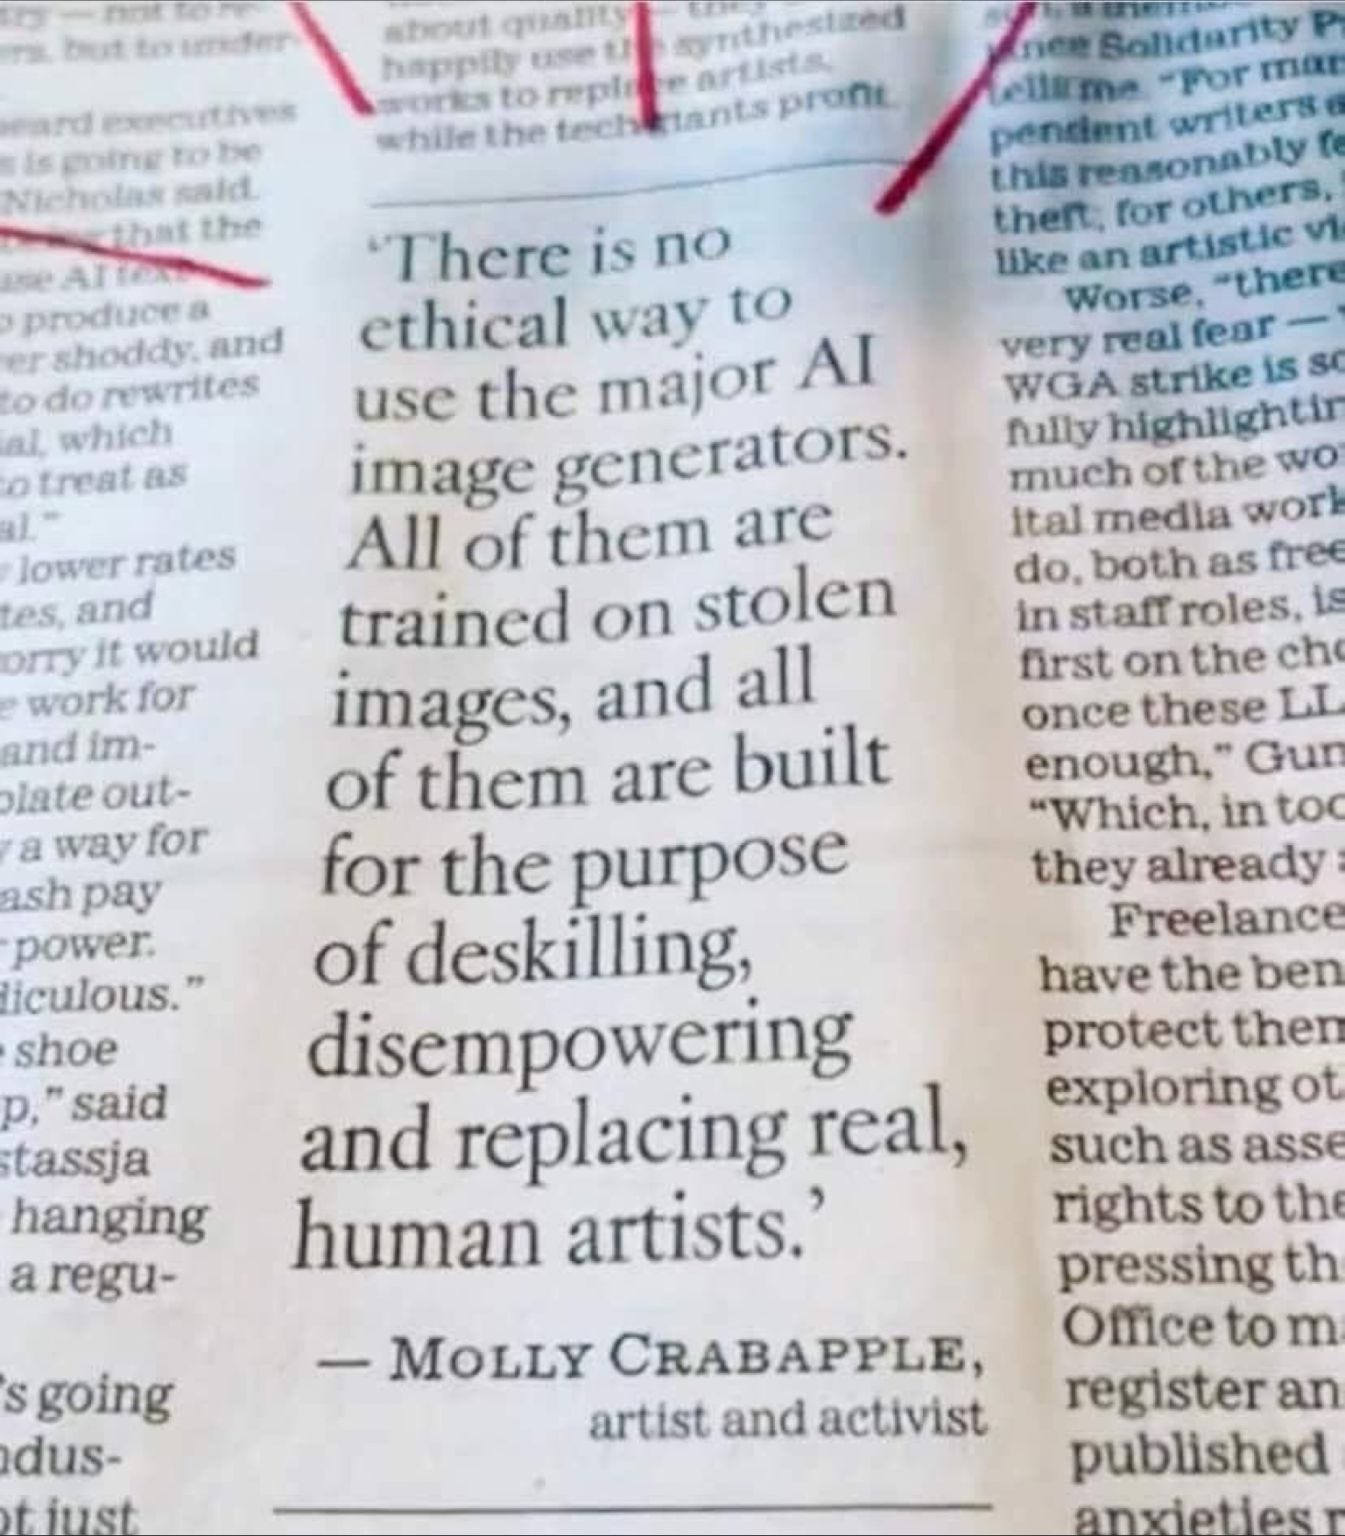 „There is no ethical way to use the major AI image generators. All of them are trained on stolen images, and all of them are built for the purpose of deskilling, disempowering and replacing real human artists.“ - Molly Crabapple